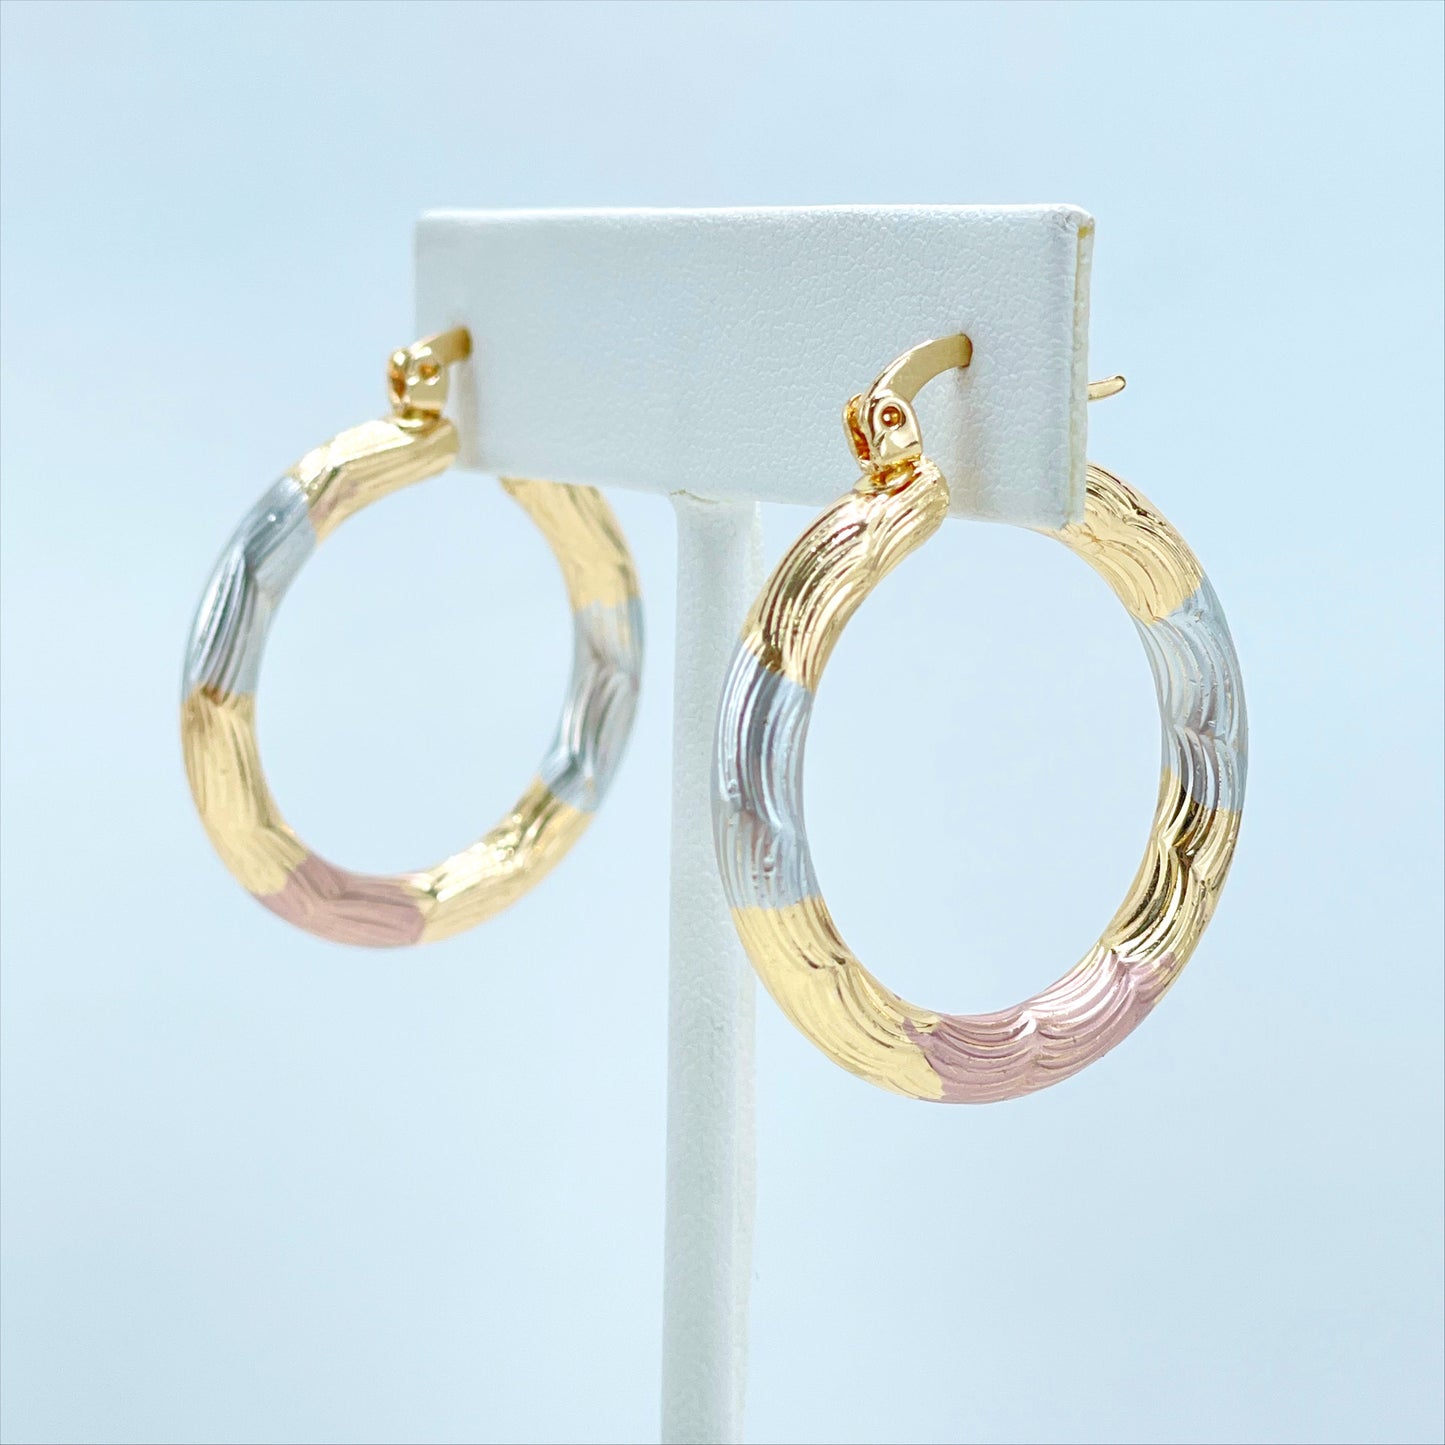 18k Gold Filled Three Tone, Tri Color 30mm Textured Hoop Earrings, 4mm Thickness Wholesale Jewelry Making Supplies